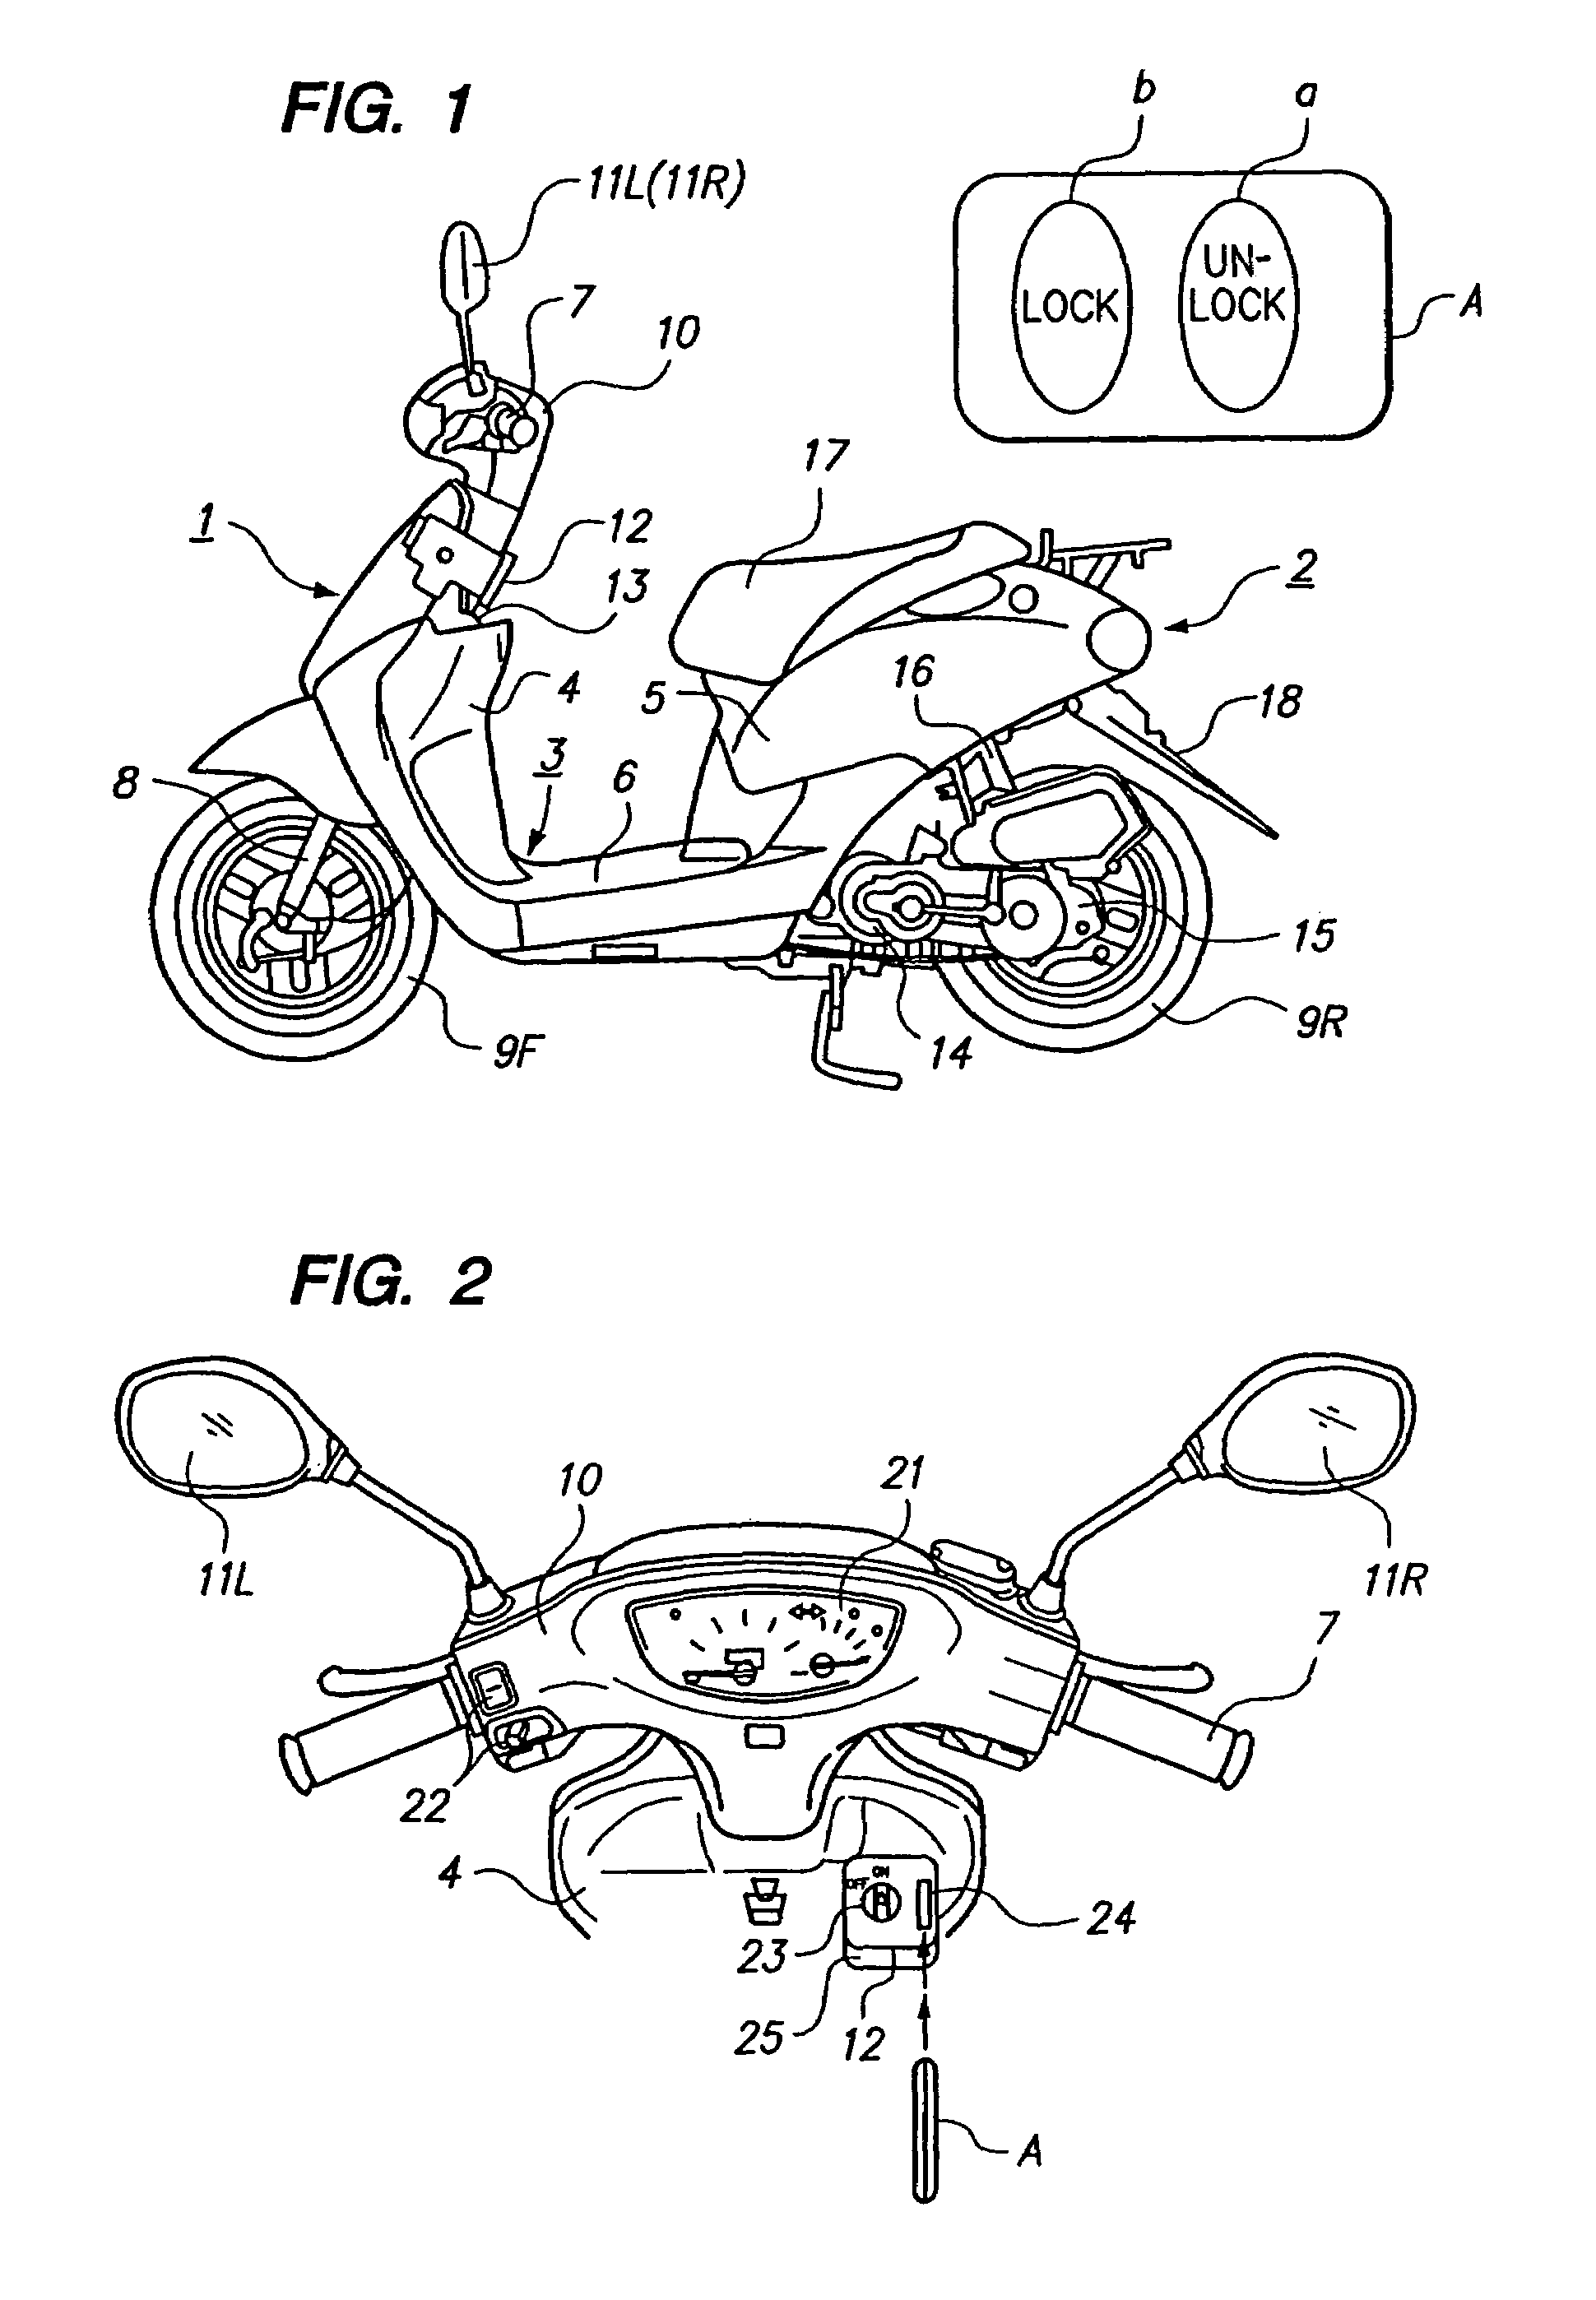 Anti-theft device in motorcycle